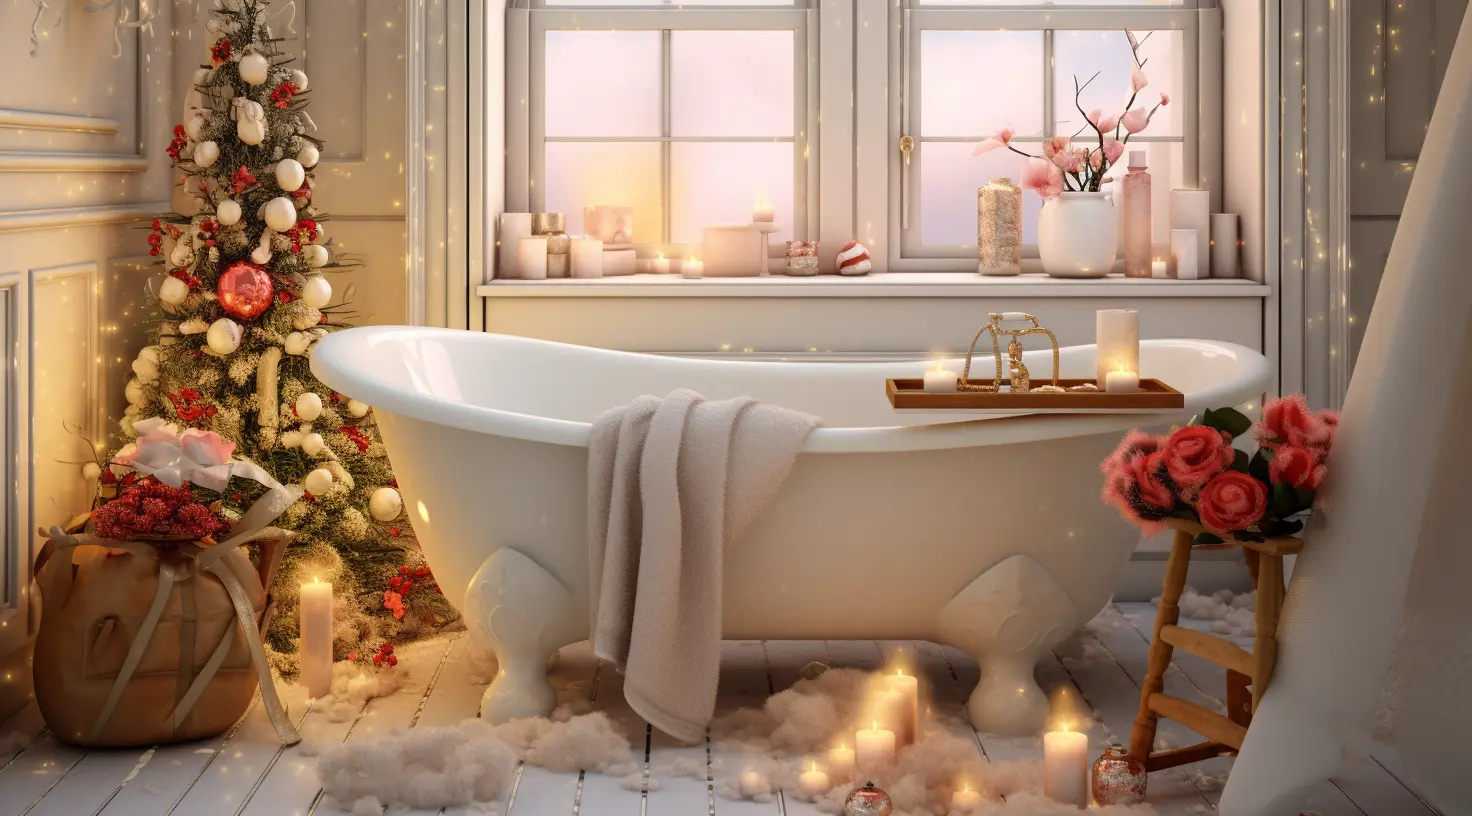 A bathroom with a christmas tree and candles.